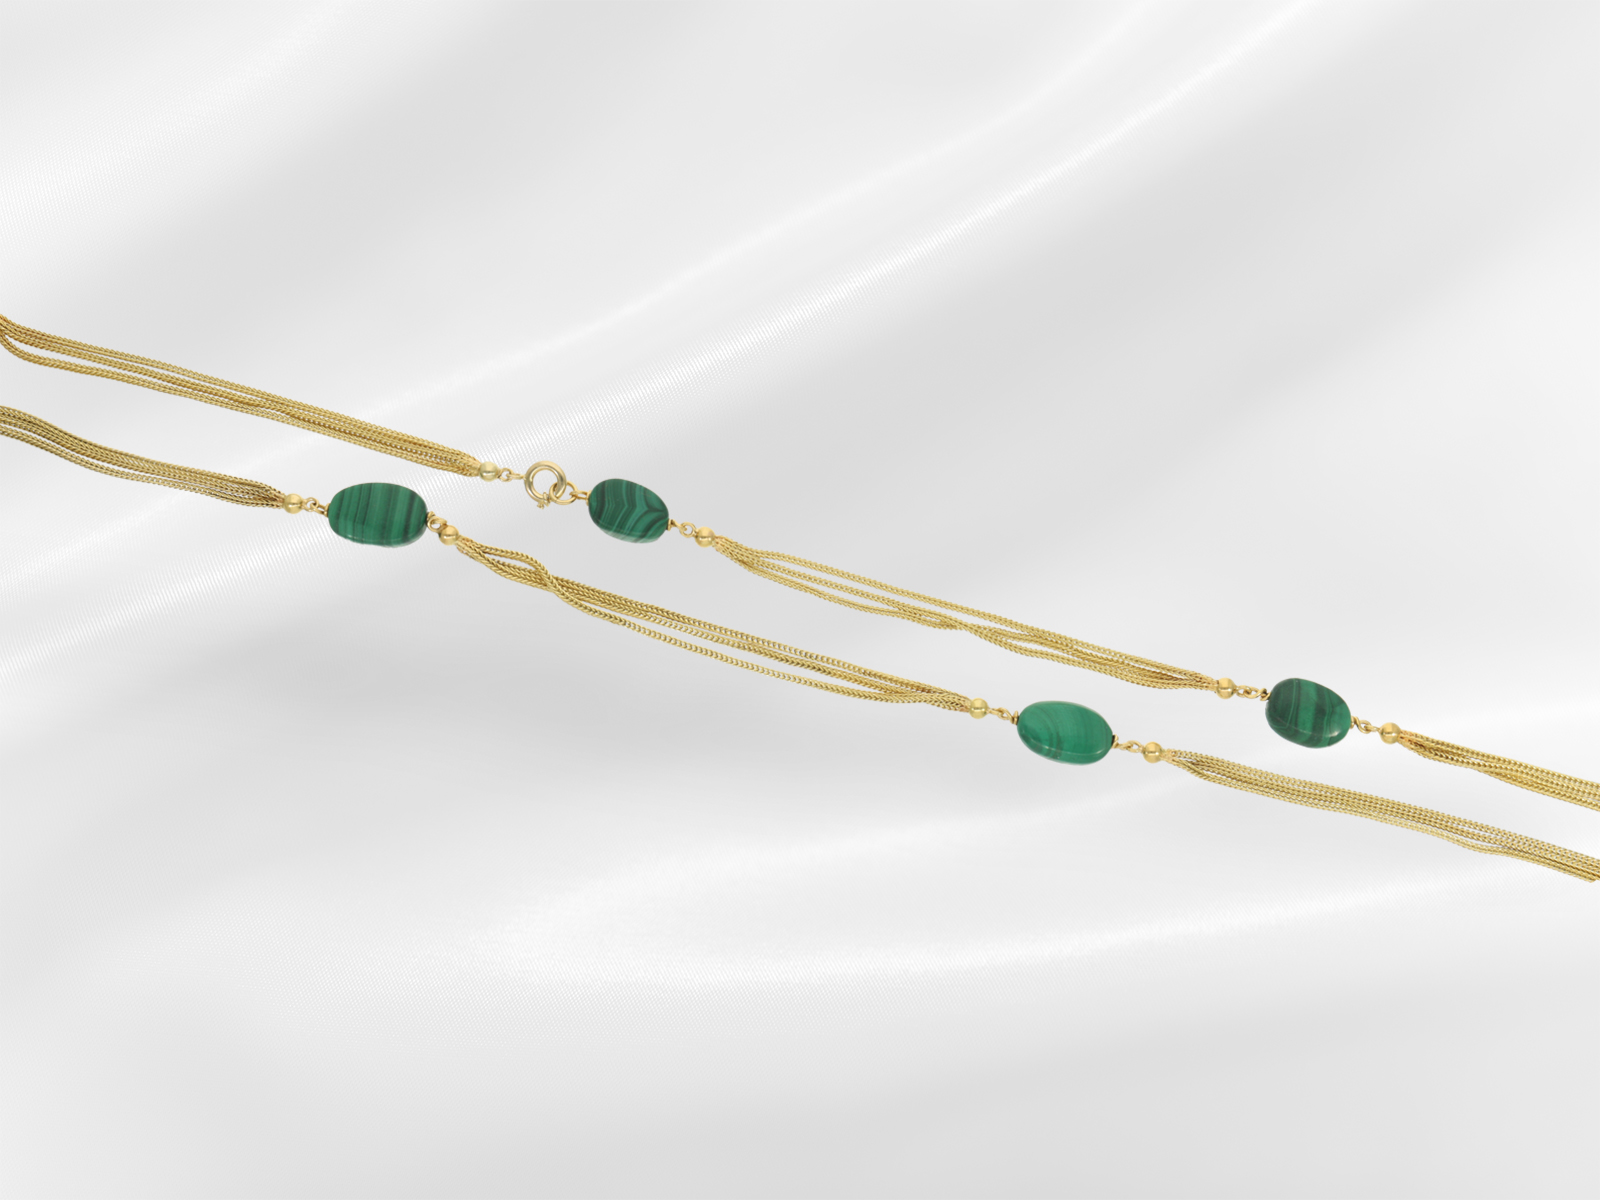 Chain/necklace: extremely long, high-quality malachite 18K gold chain - Image 3 of 3